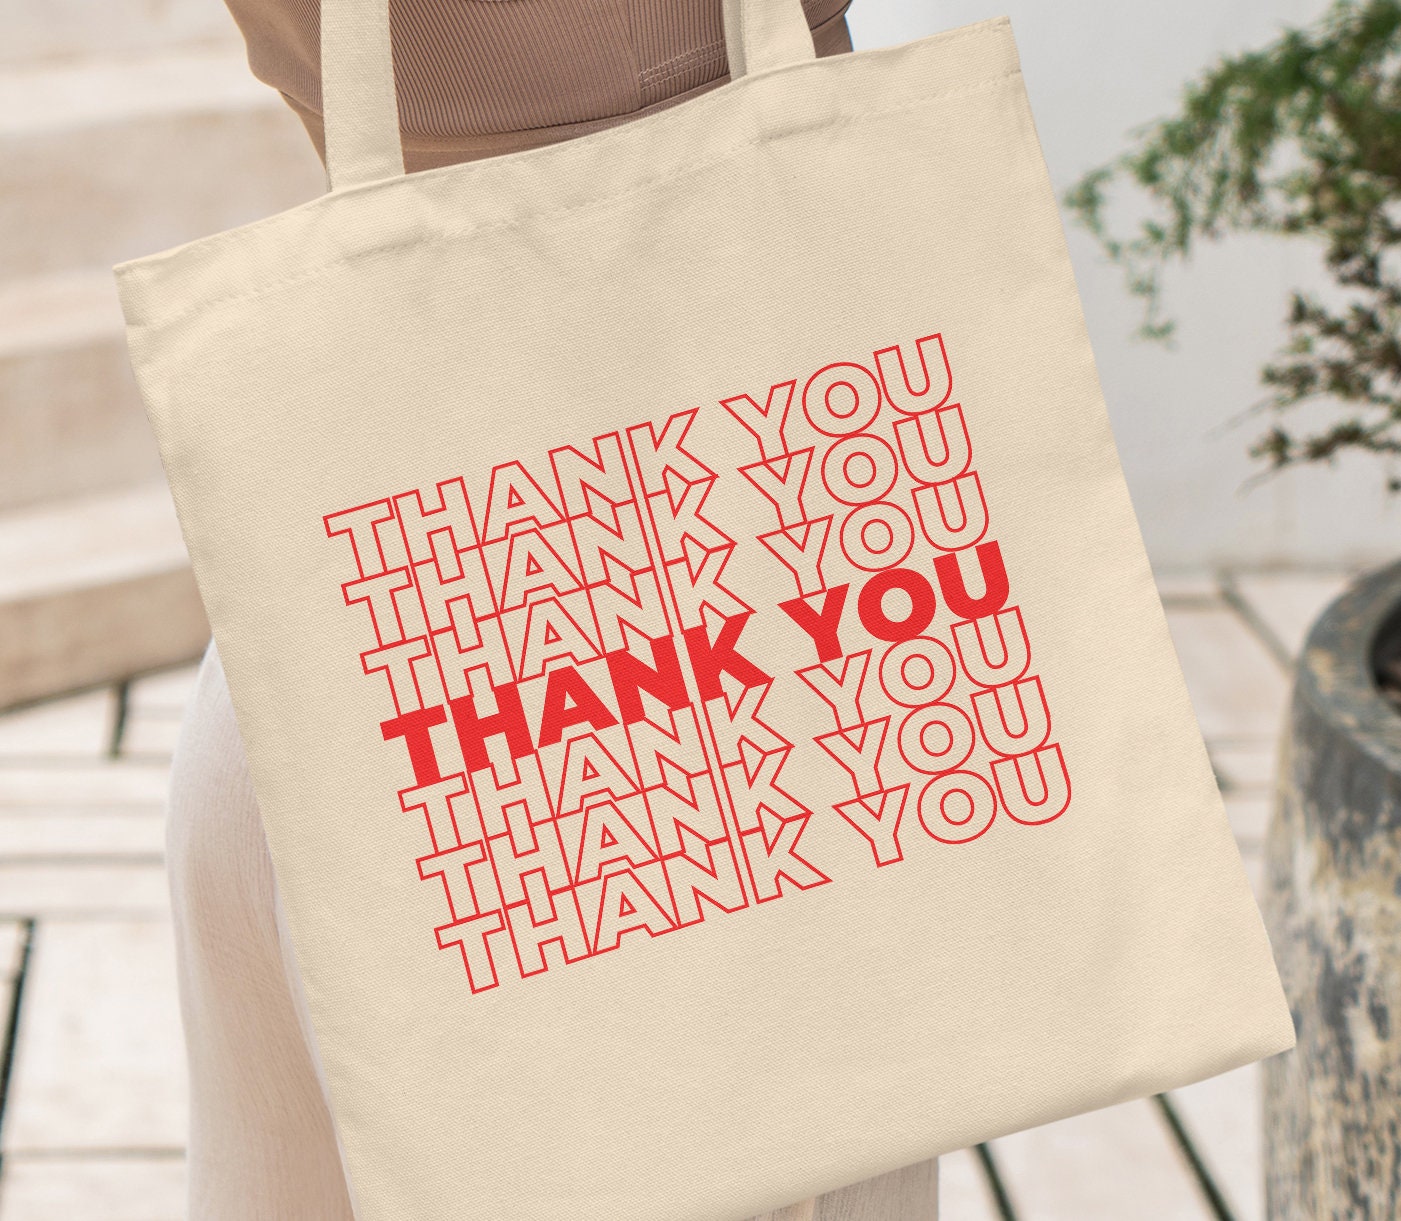 26 Best Thank You Bags ideas | thank you bags, bags, plastic bag